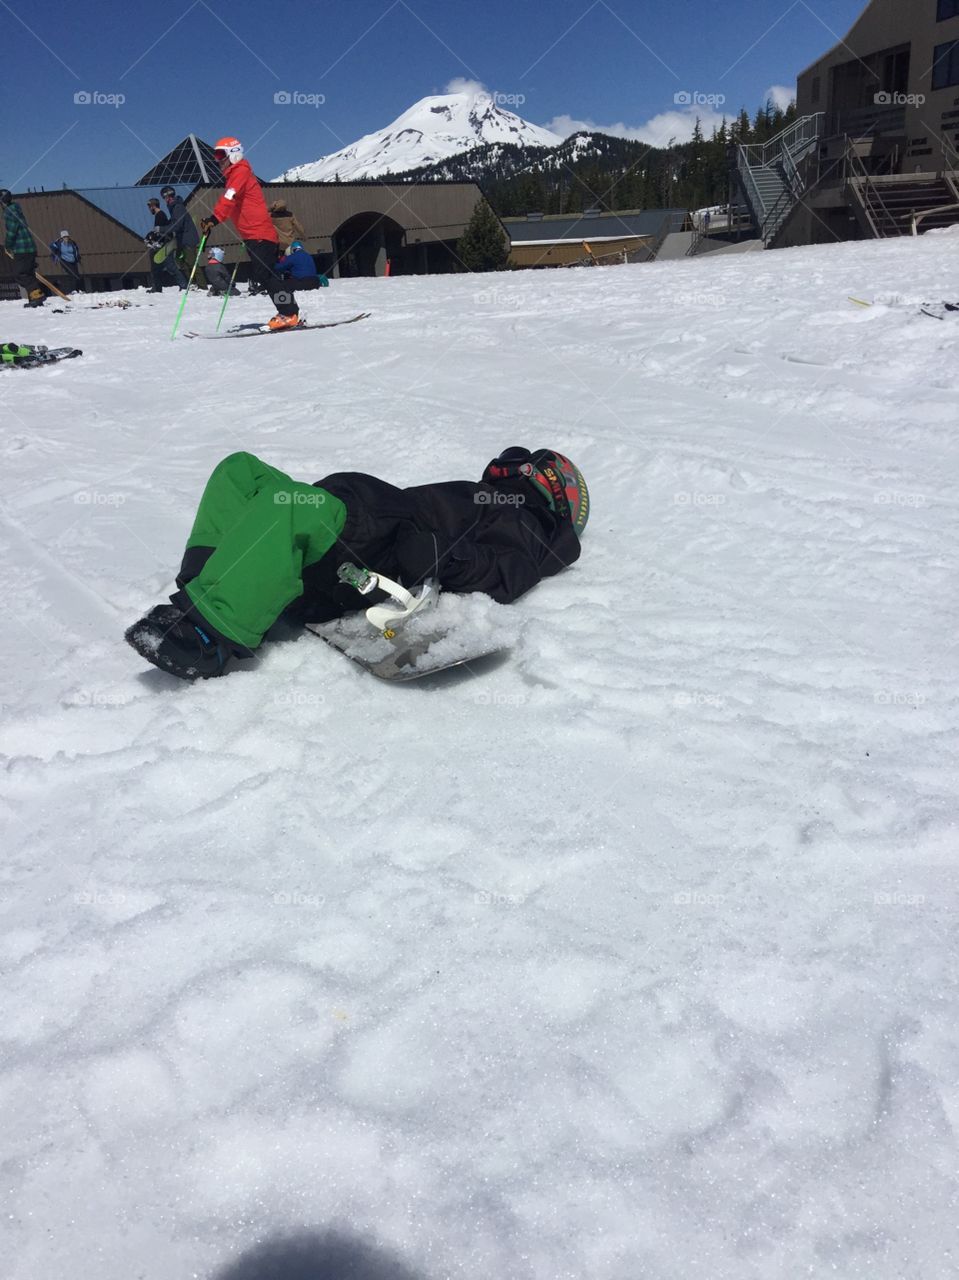 Oh the frustration of learning how to snowboard. 